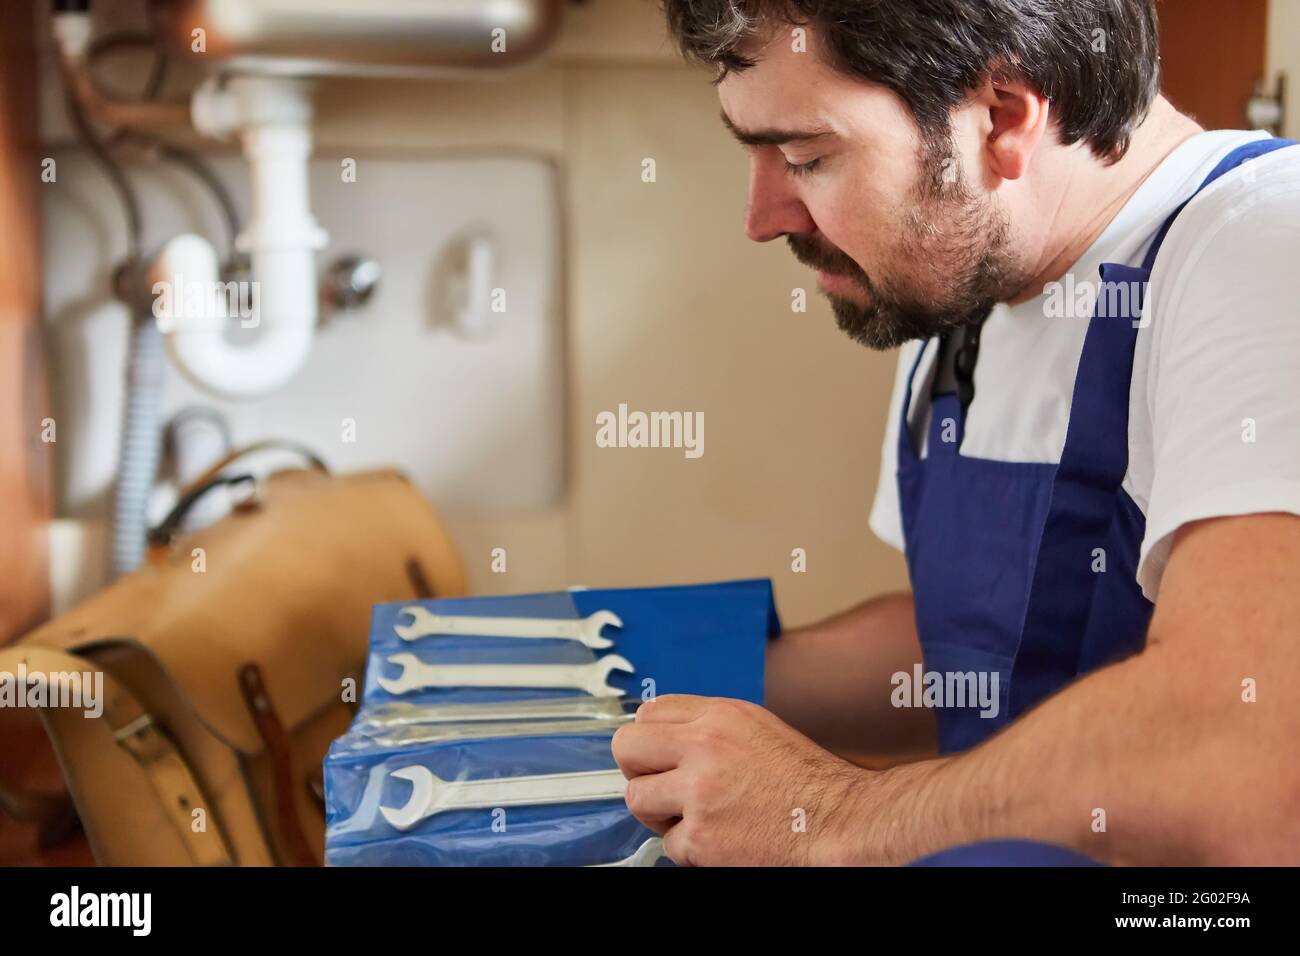 Plumber or plumber from the emergency service with tools to repair the installation Stock Photo